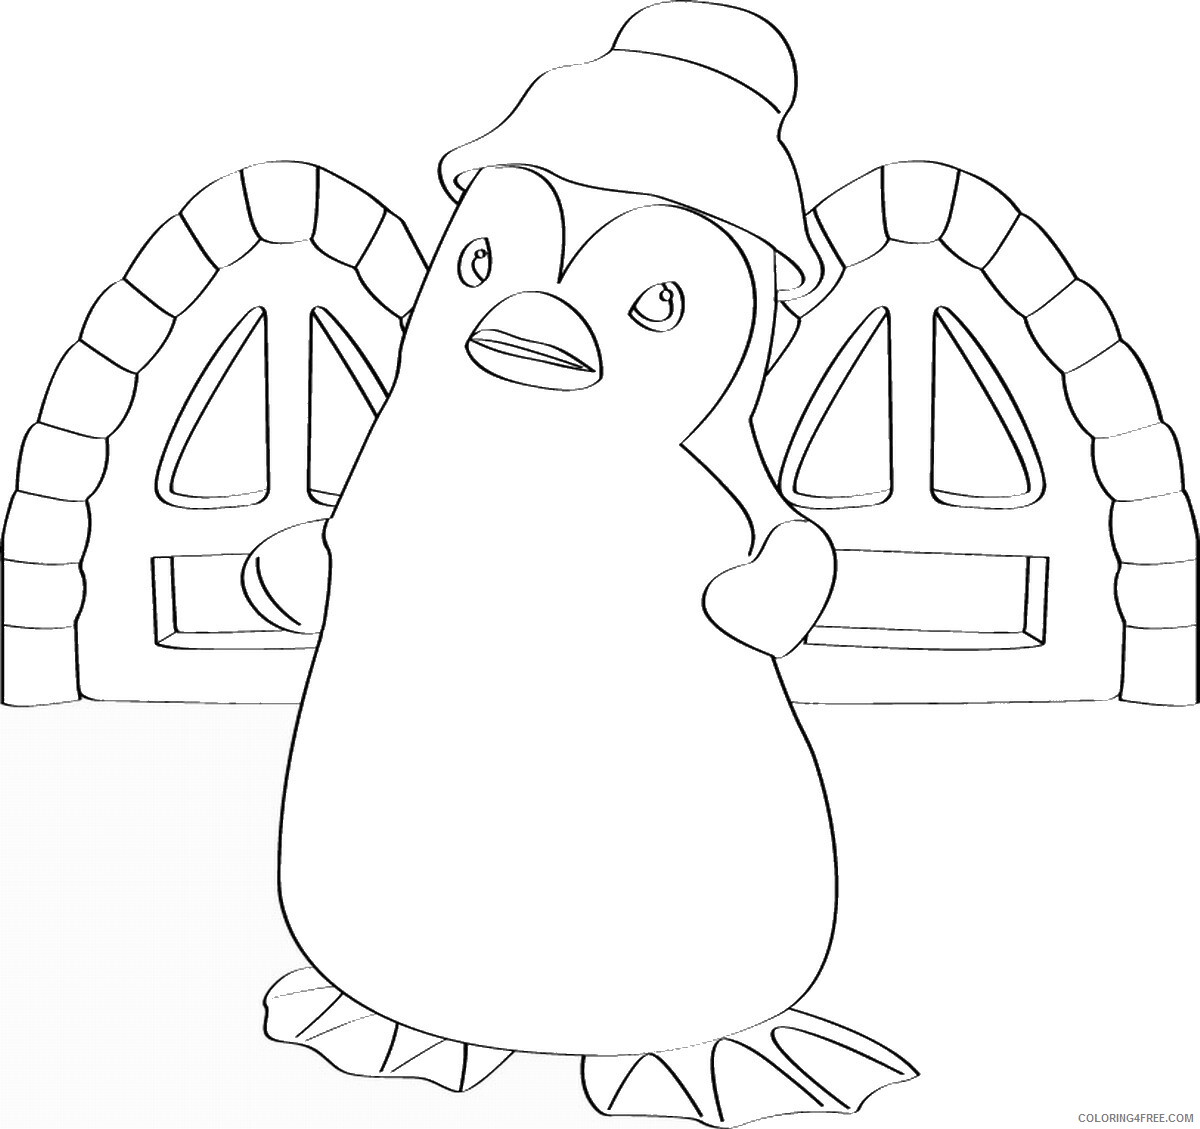 Ozie Boo Coloring Pages TV Film Ozie_Boo_cl_02 Printable 2020 05854 Coloring4free